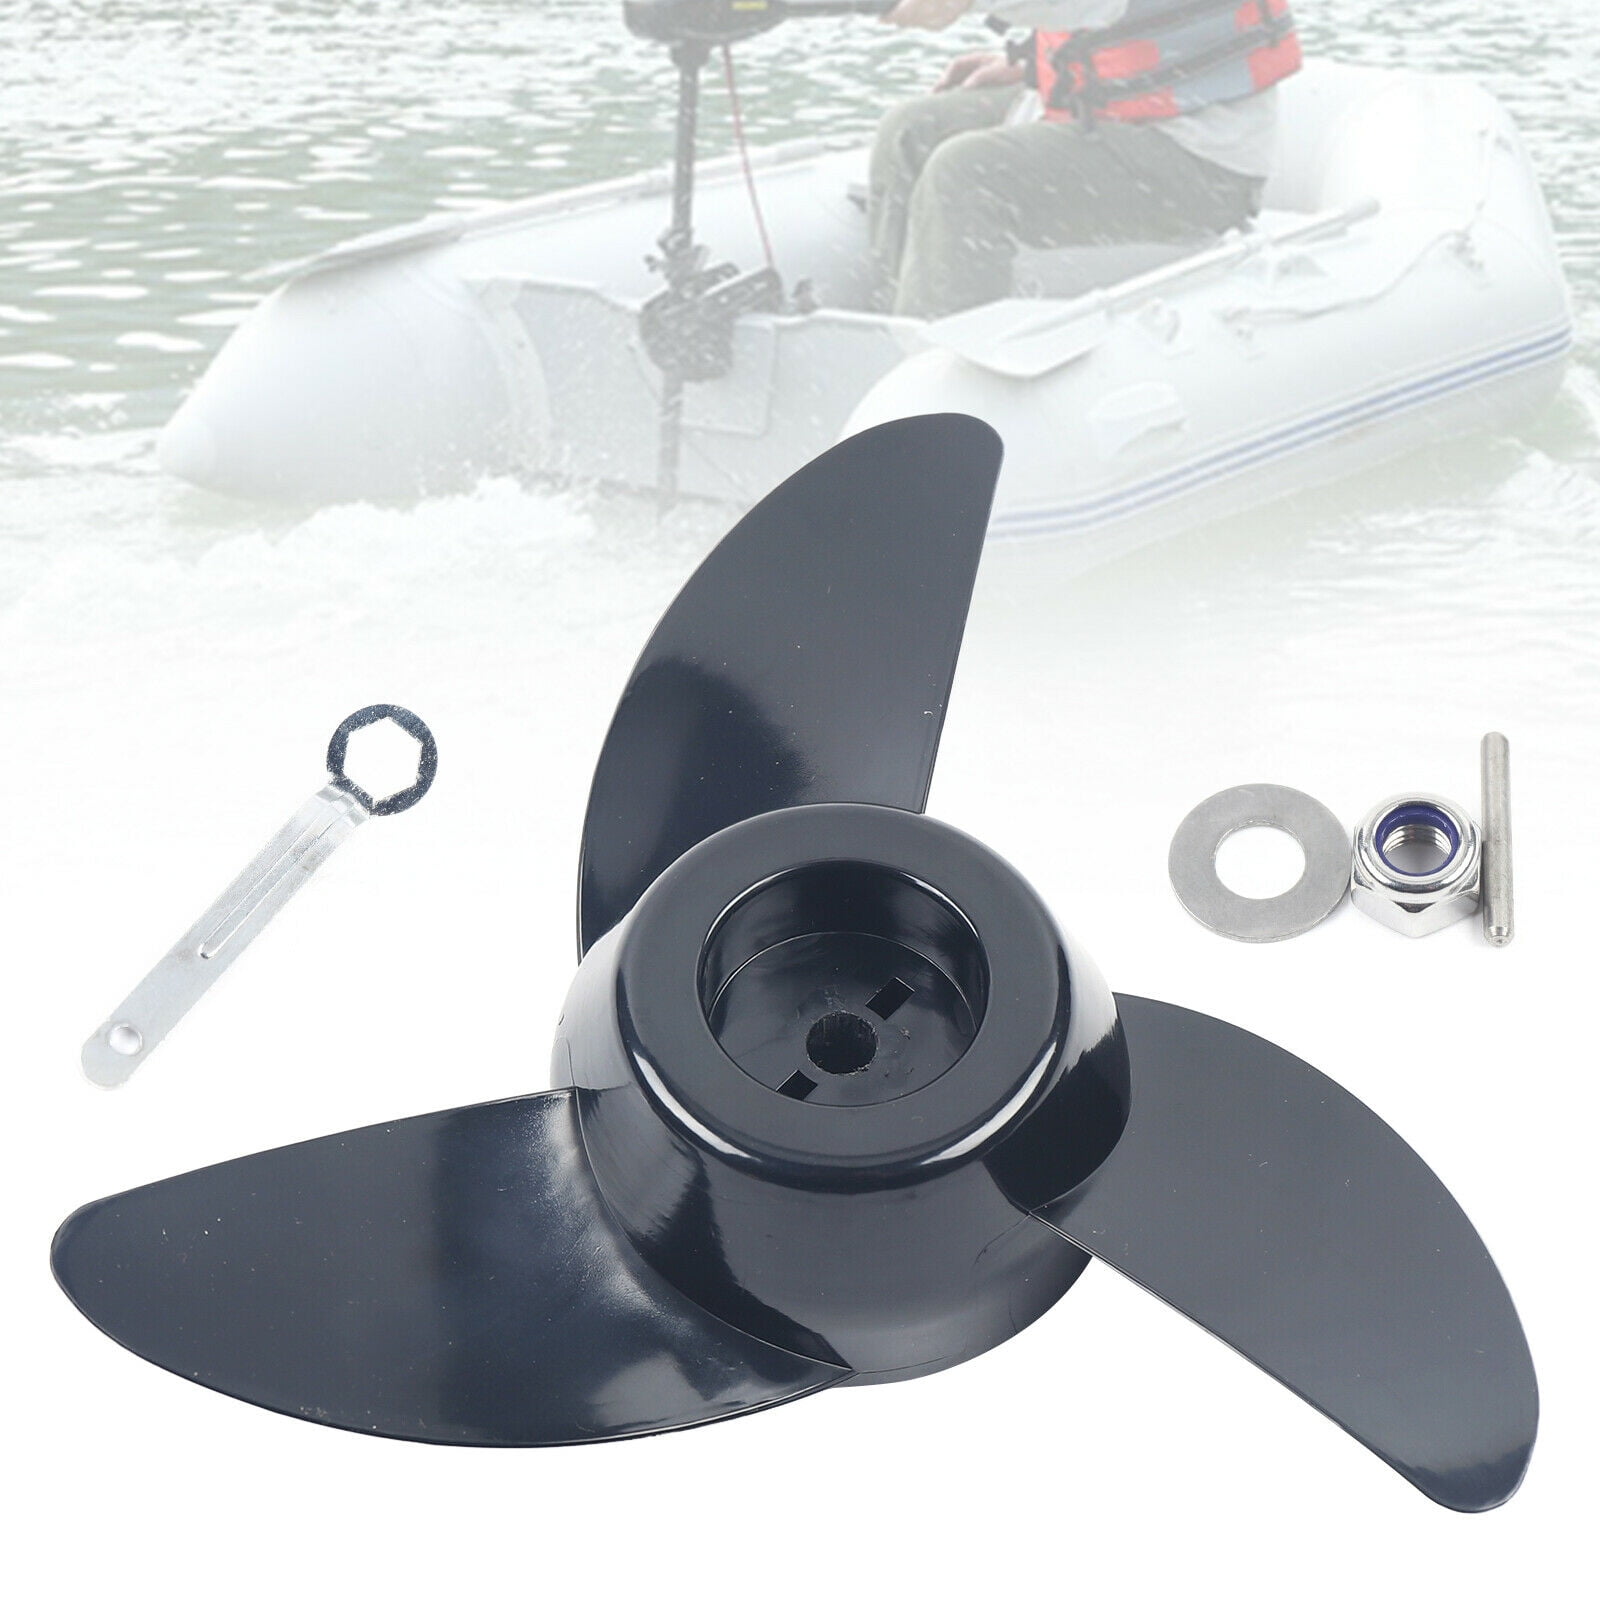 Surfing Accessories High Speed Strong Motor Boat Propeller Engine Outboard Electric Trolling Motor Outboard Nylon Propeller Surfboard Boat Accessory DIY Tool Surfboard Accessory 